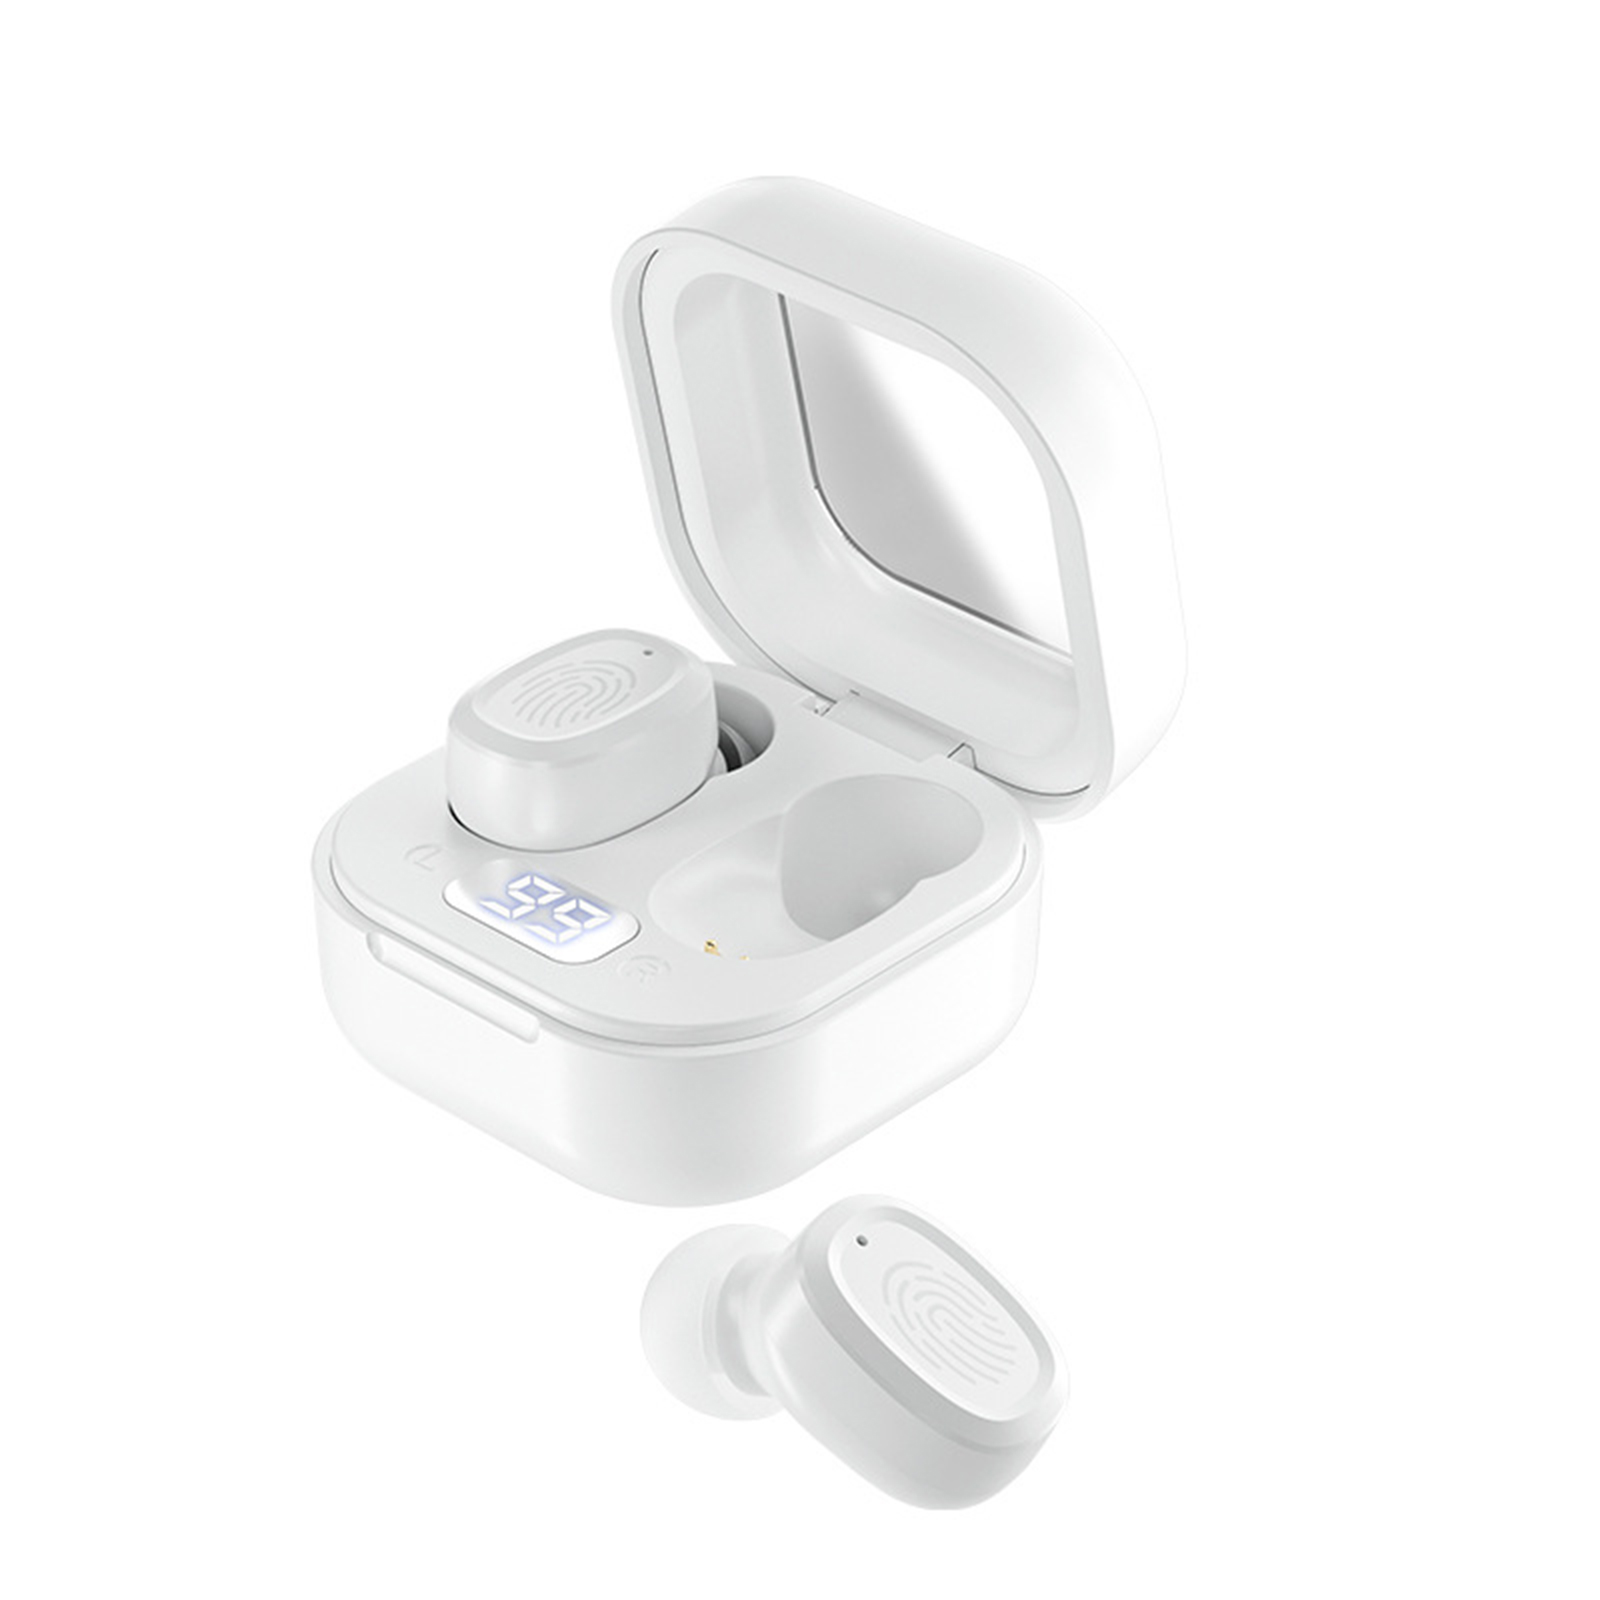 BY18 Tws Wireless Bluetooth Headphone Touch Control Noise Reduction Digital Display In-ear Sports Headset